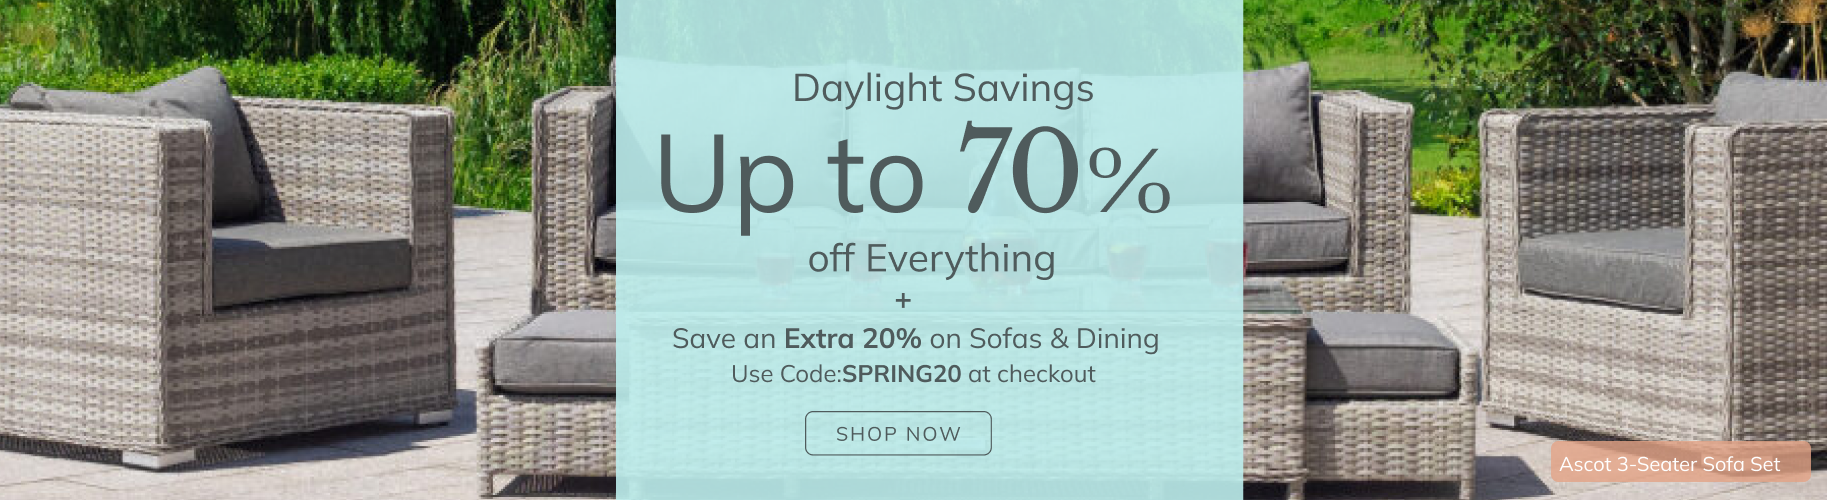 Daylight Savings Up to 70% off Everything